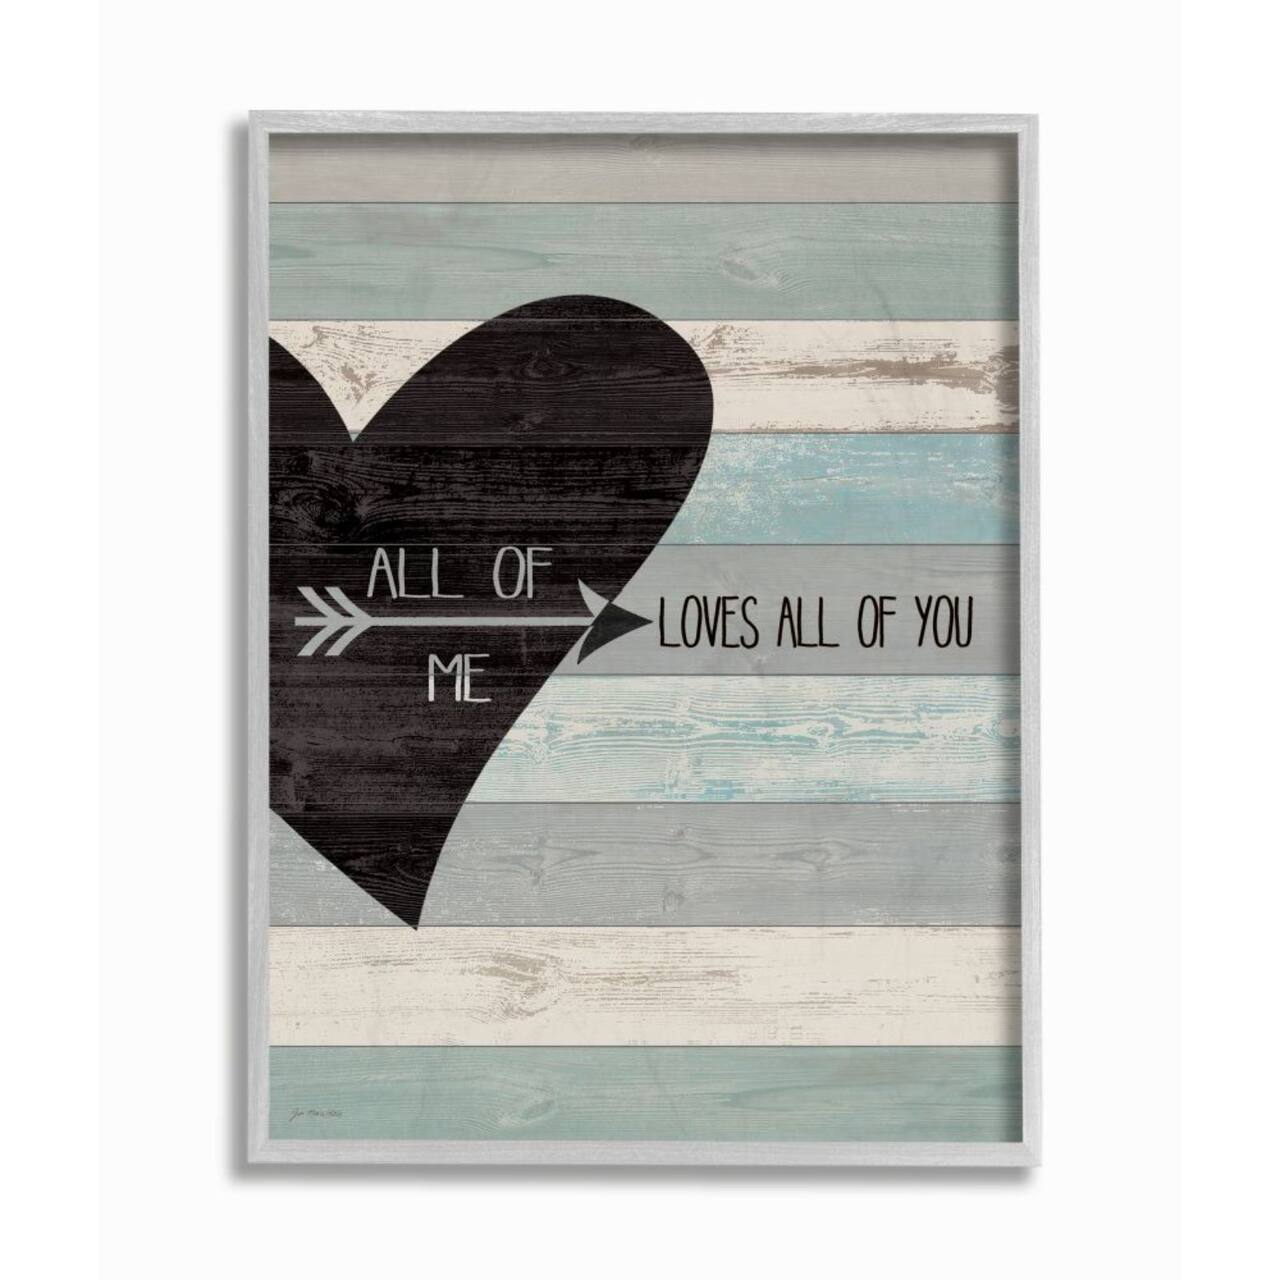 Stupell Industries All of Me Loves All of You Distressed Heart with Gray Frame Wall Accent